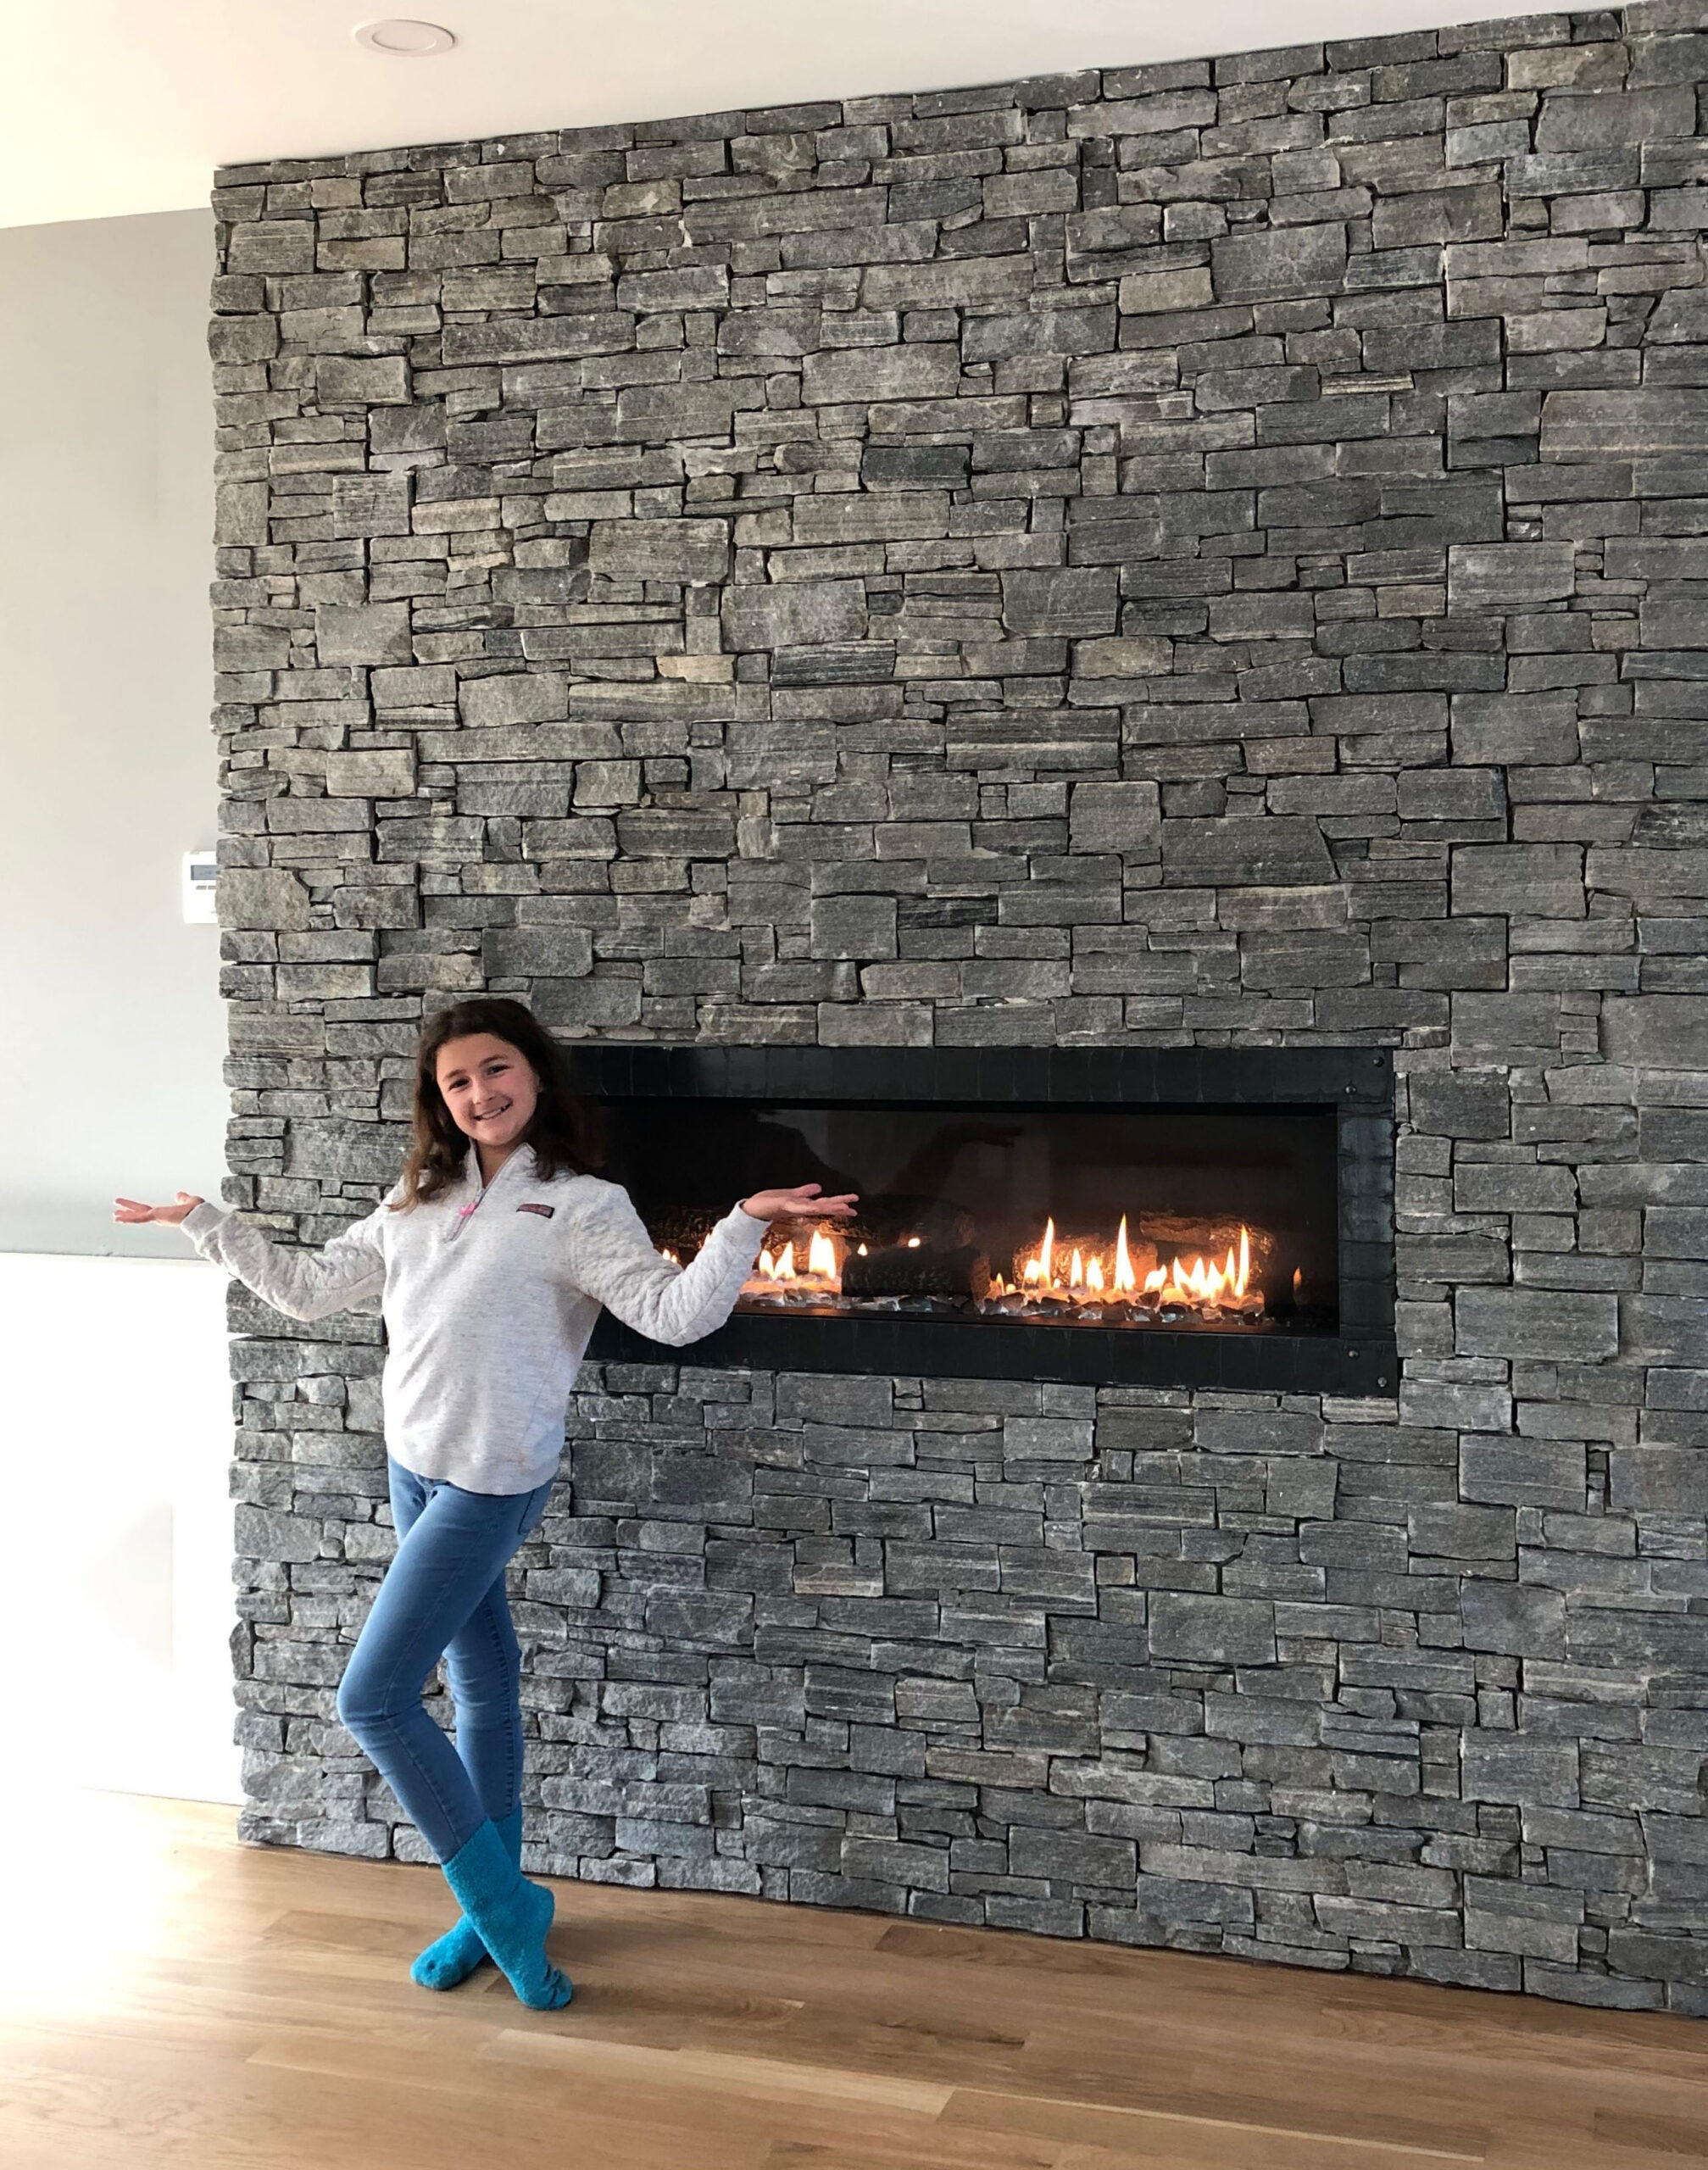 Interloc Natural Stone Veneer Panels are shown in Berkshire on this Fireplace.